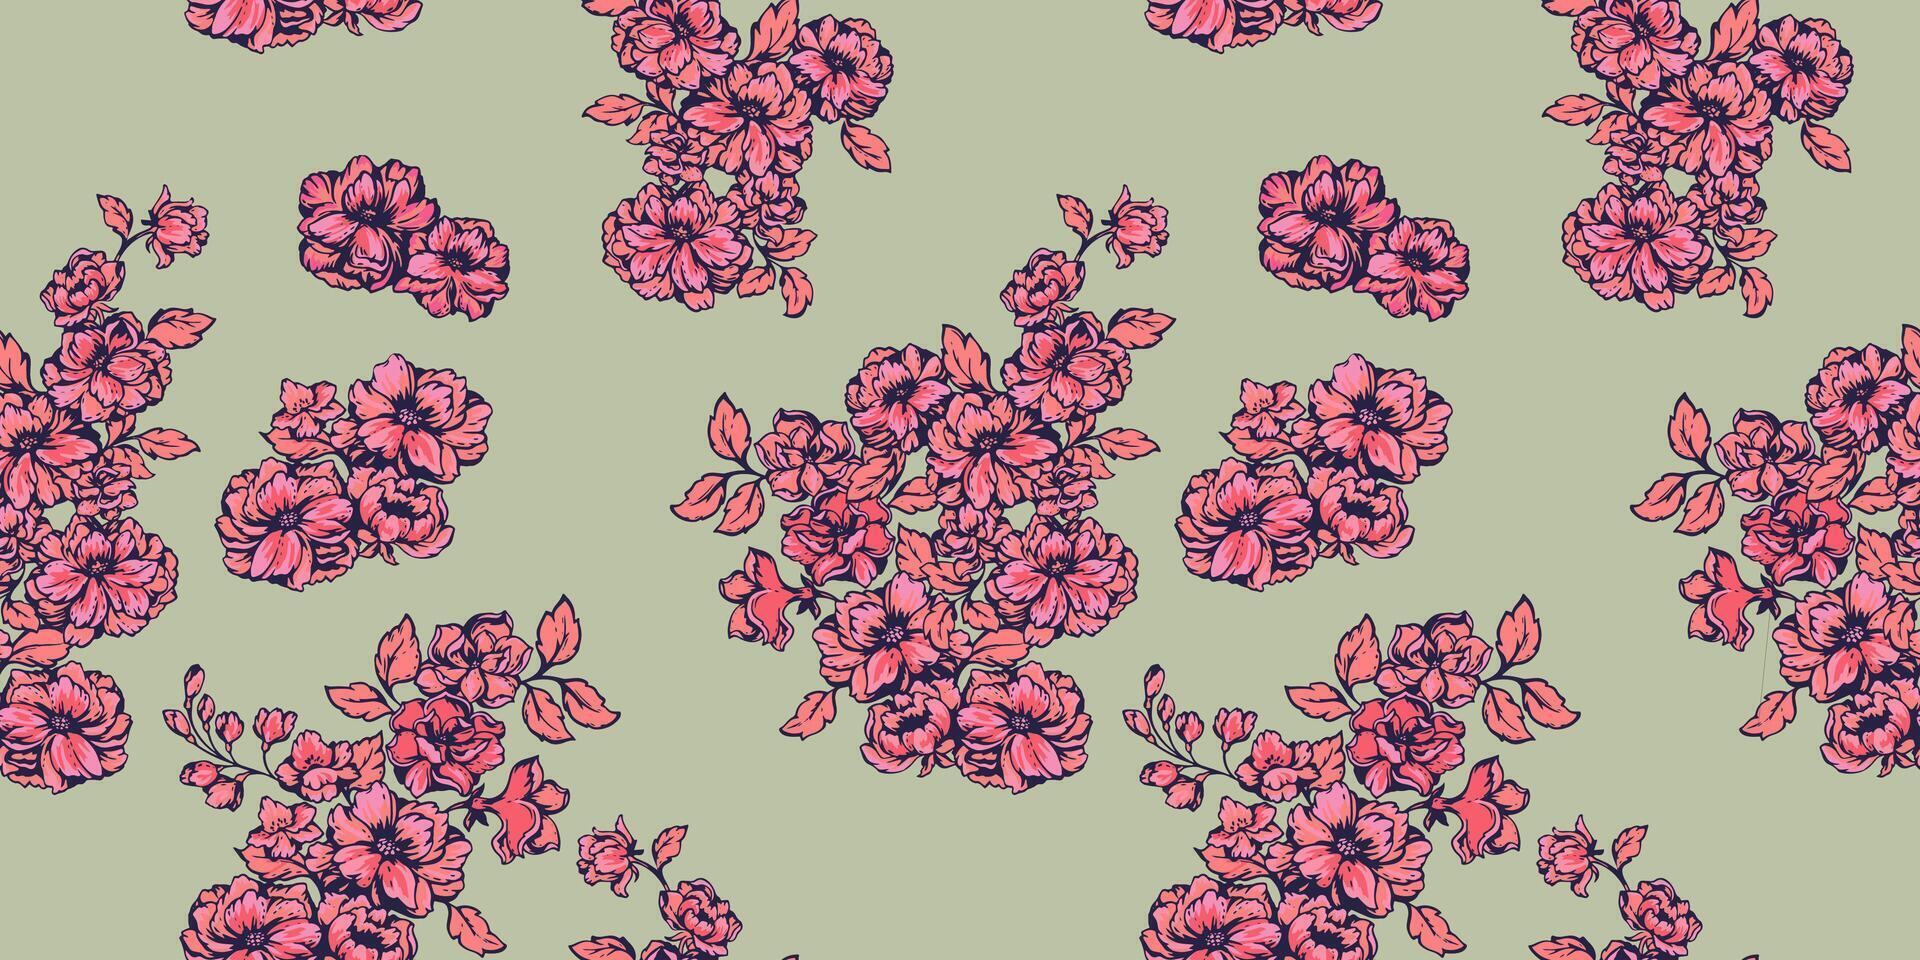 Seamless pattern with bouquets creative stylized wild flowers, buds, leaves. Blooming red abstract floral branches on a green background. Vector hand drawn. Collage template for printing, patterned,